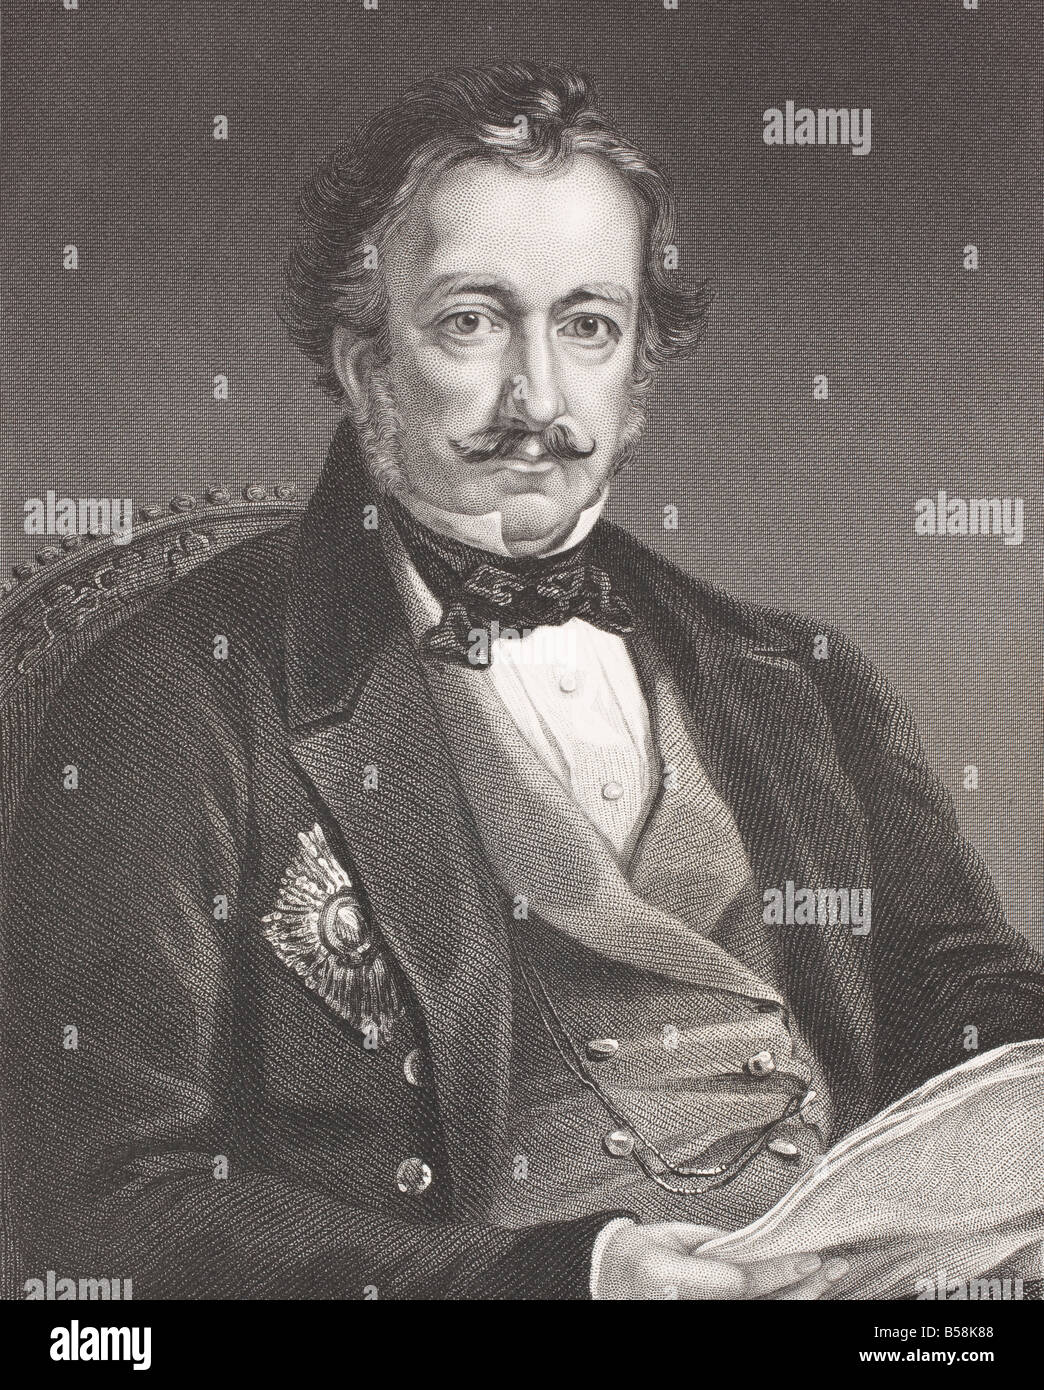 Sir Henry Eldred Curwen Pottinger, 1st Baronet, 1789 - 1856. Anglo - soldato irlandese, amministratore coloniale. Primo Governatore di Hong Kong. Foto Stock